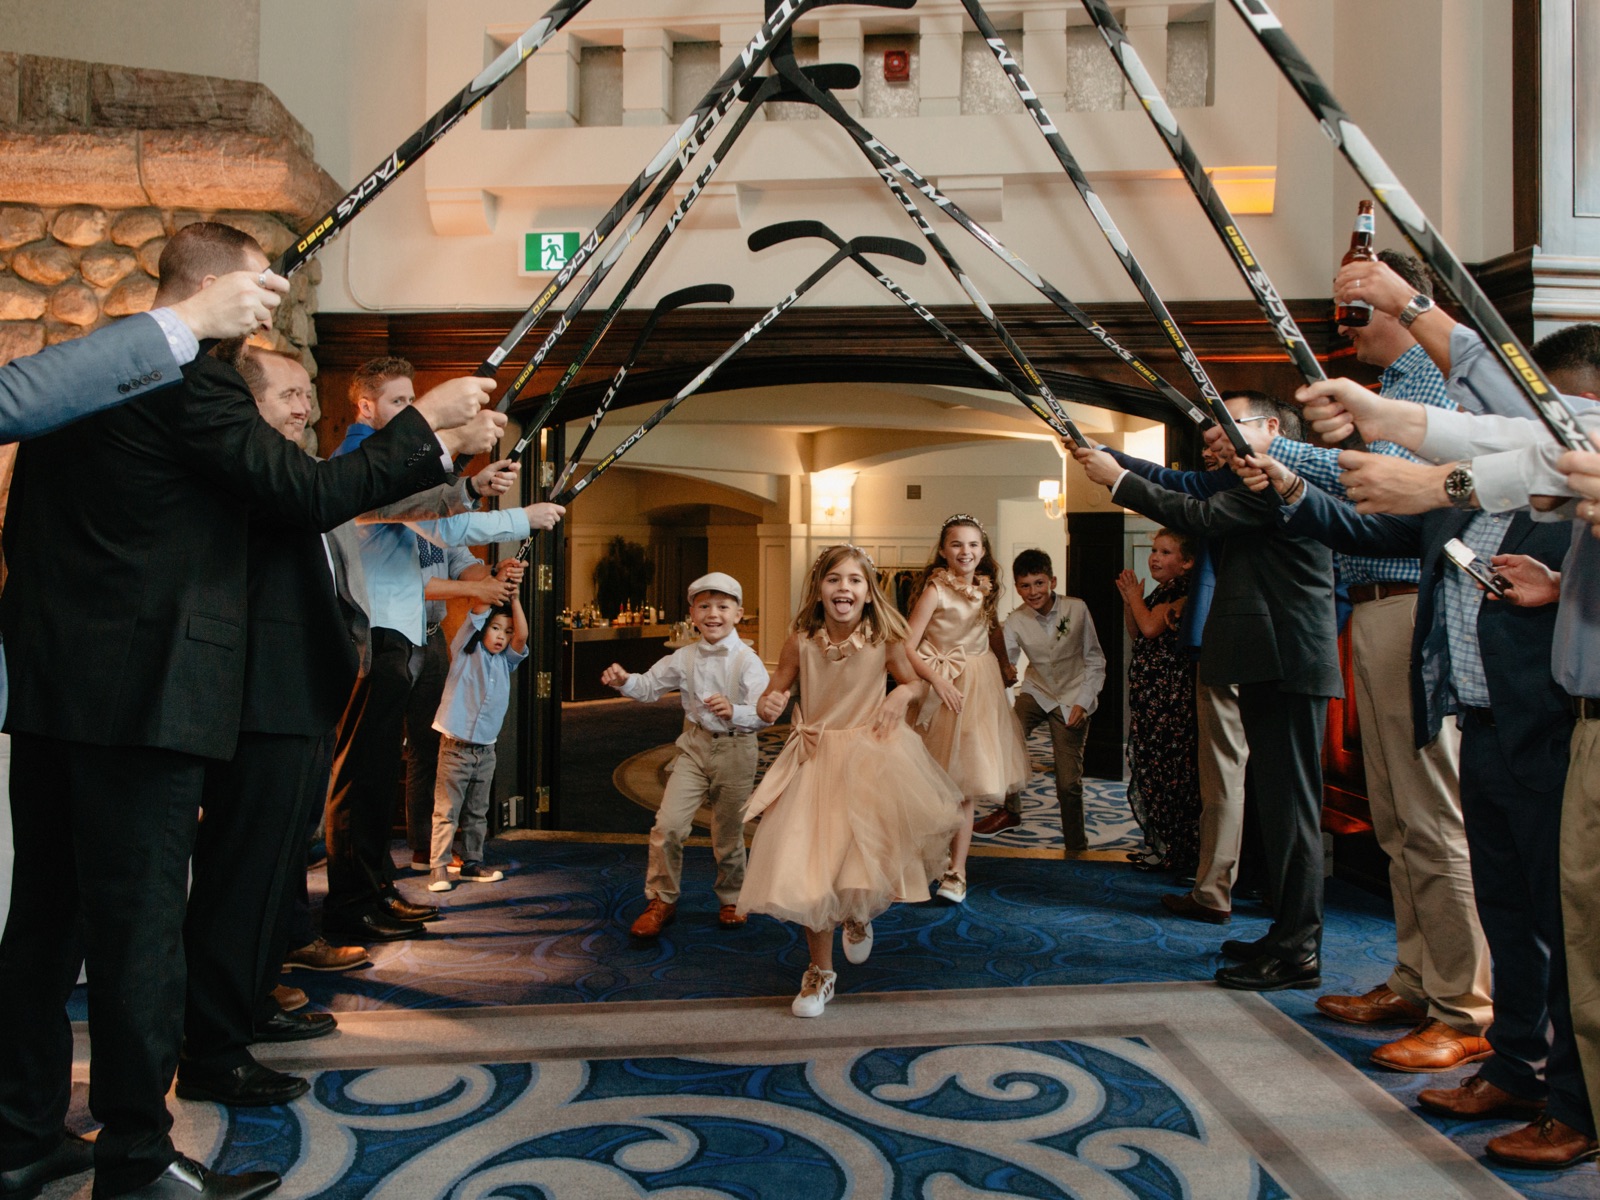 Kids' hockey stick tunnel entrance into their parents' wedding